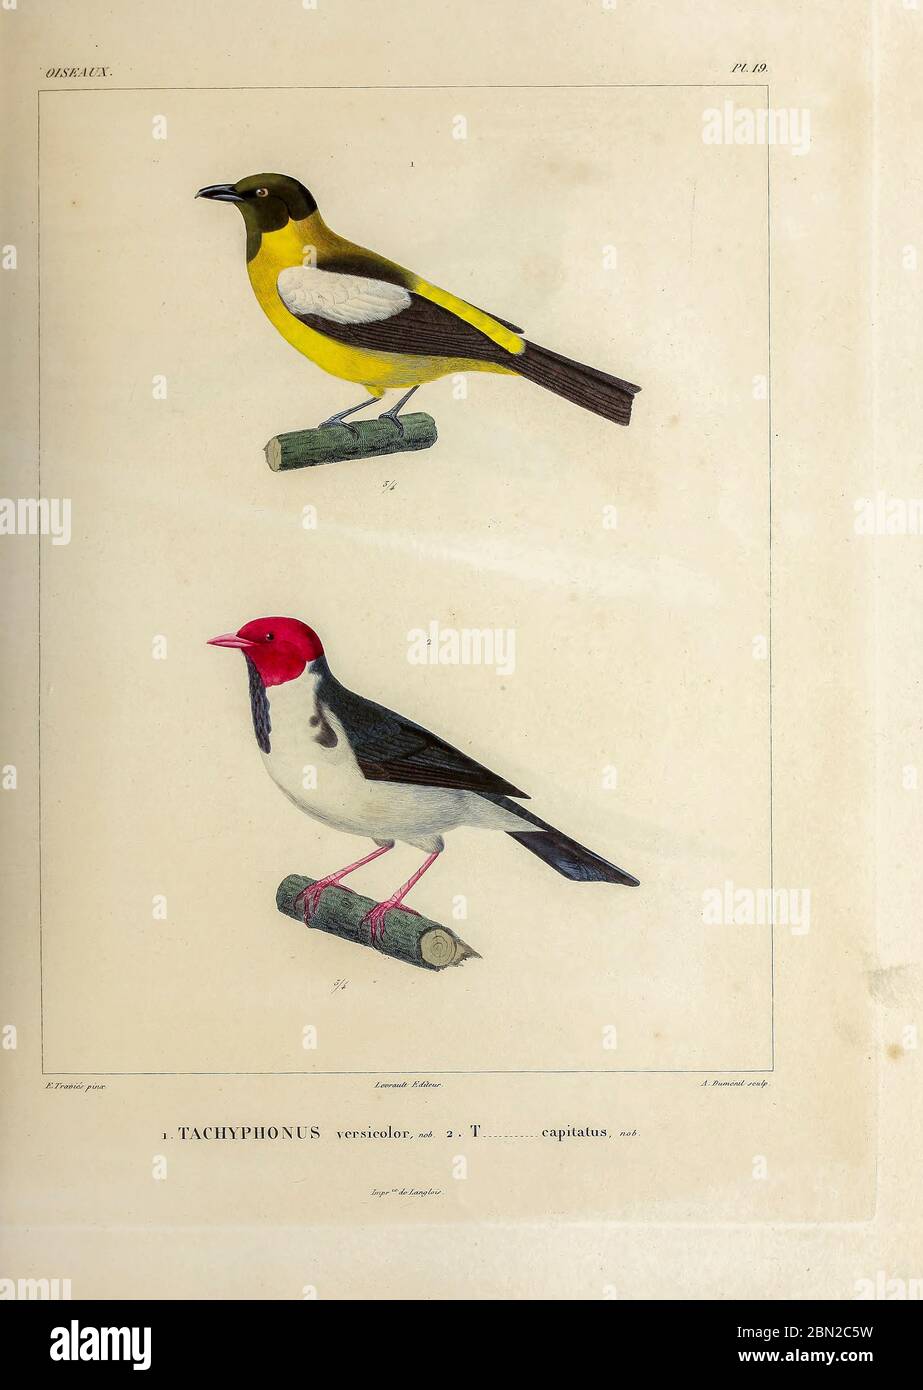 hand coloured sketch Top: white-winged shrike-tanager (Lanio versicolor) [Here as Tachyphonus versicolor]) Bottom: yellow-billed cardinal (Paroaria capitata) [Here as Tachyphonus capitatus]) From the book 'Voyage dans l'Amérique Méridionale' [Journey to South America: (Brazil, the eastern republic of Uruguay, the Argentine Republic, Patagonia, the republic of Chile, the republic of Bolivia, the republic of Peru), executed during the years 1826 - 1833] 4th volume Part 3 By: Orbigny, Alcide Dessalines d', d'Orbigny, 1802-1857; Montagne, Jean François Camille, 1784-1866; Martius, Karl Friedrich Stock Photo